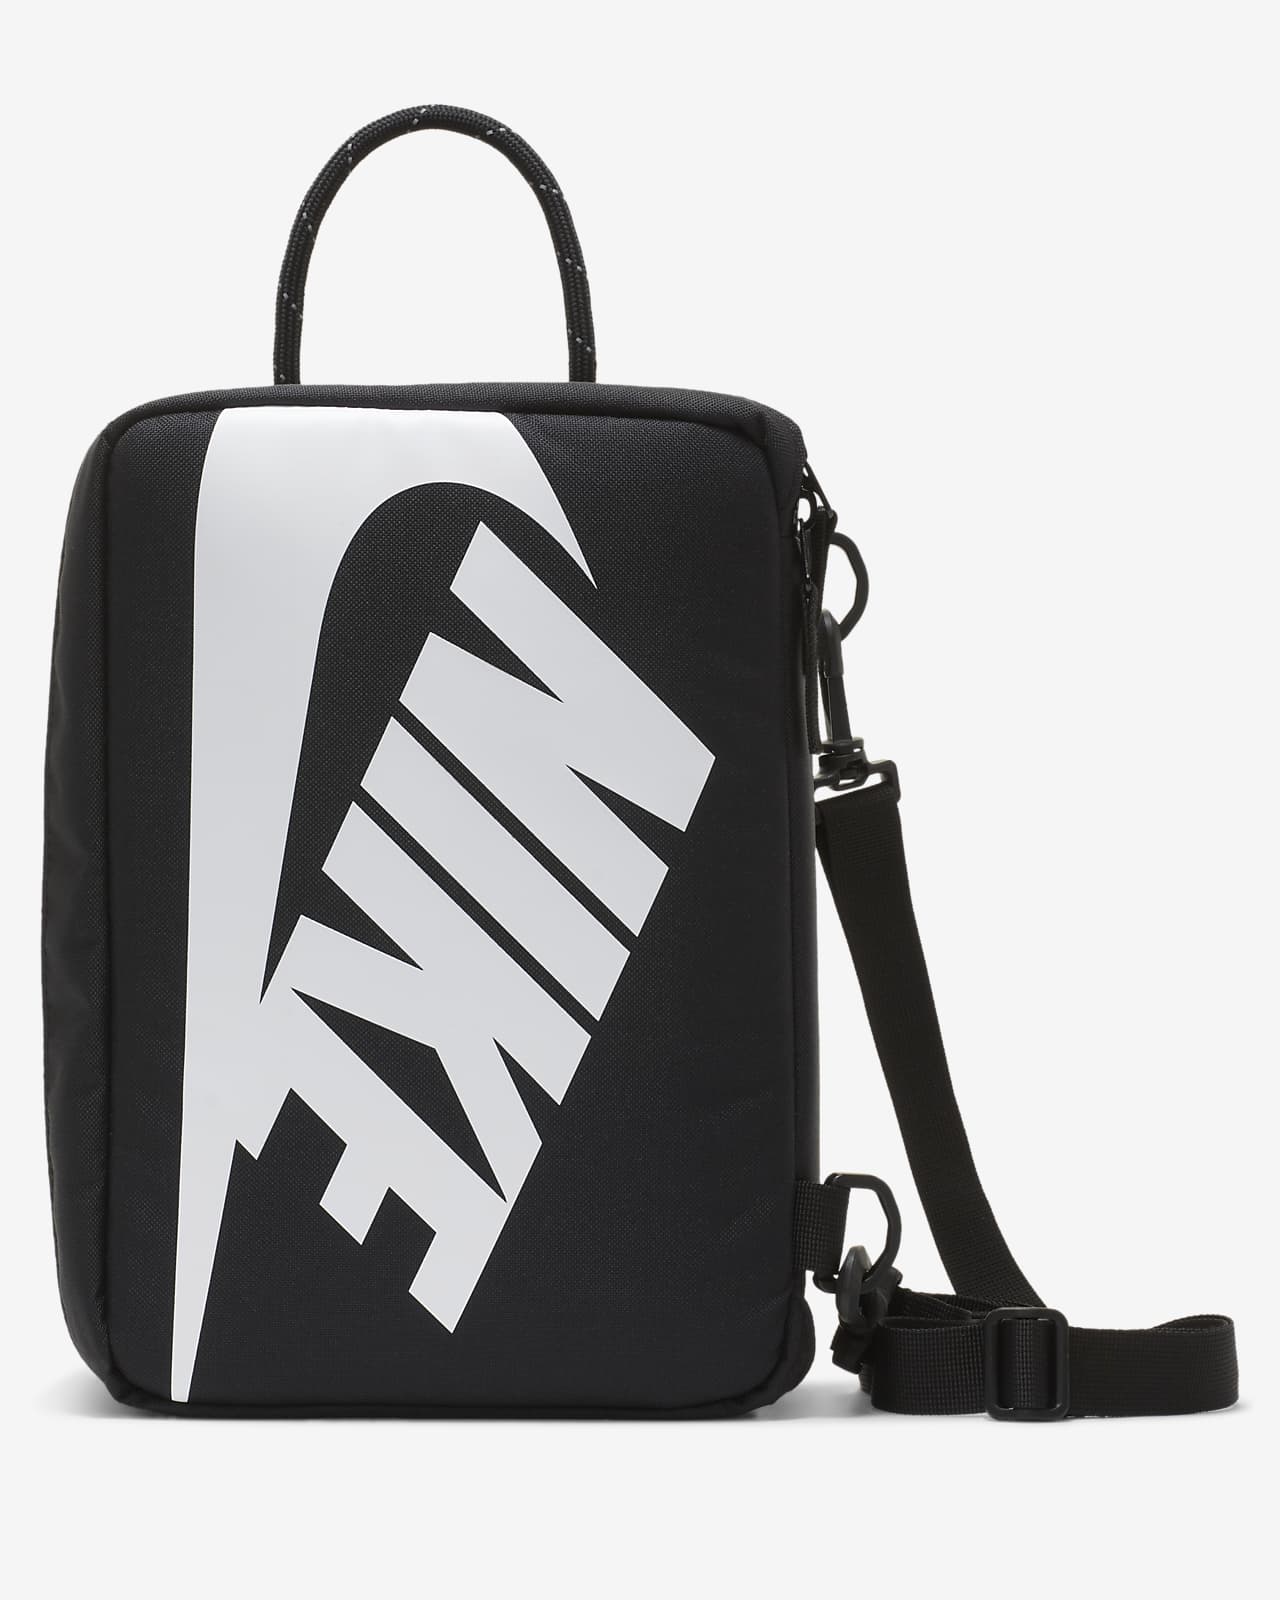 Update more than 89 nike small bag latest - in.duhocakina